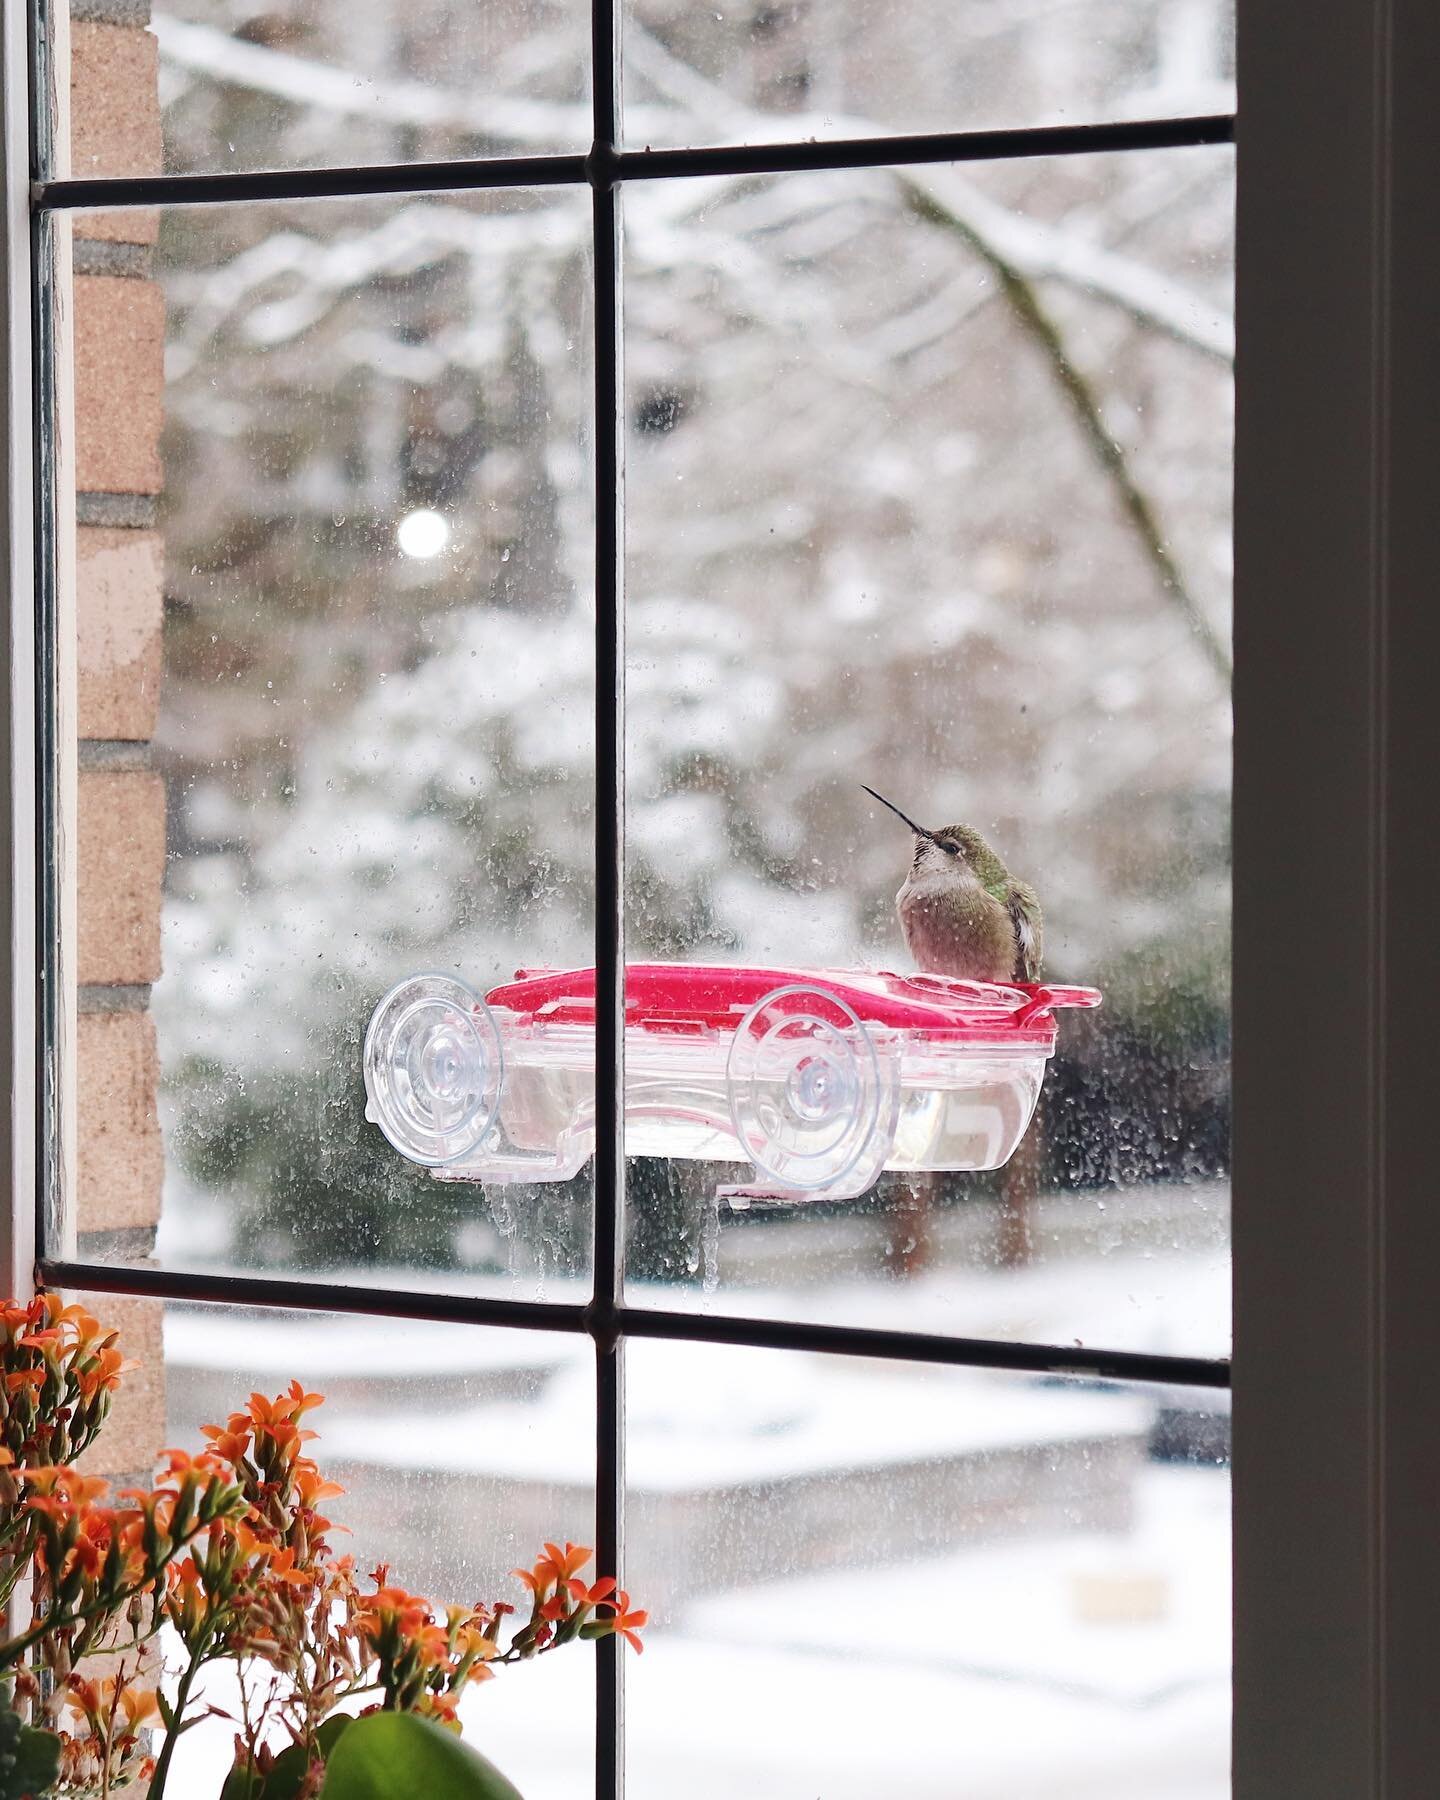 My favourite little visitors came a lot during the holidays when it was cold and snowy here 😍 Managed to take a few pics with my dslr of these cuties. (pay no attention to the window grime, they splash nectar on it with every drink haha) 

+ 1 bonus